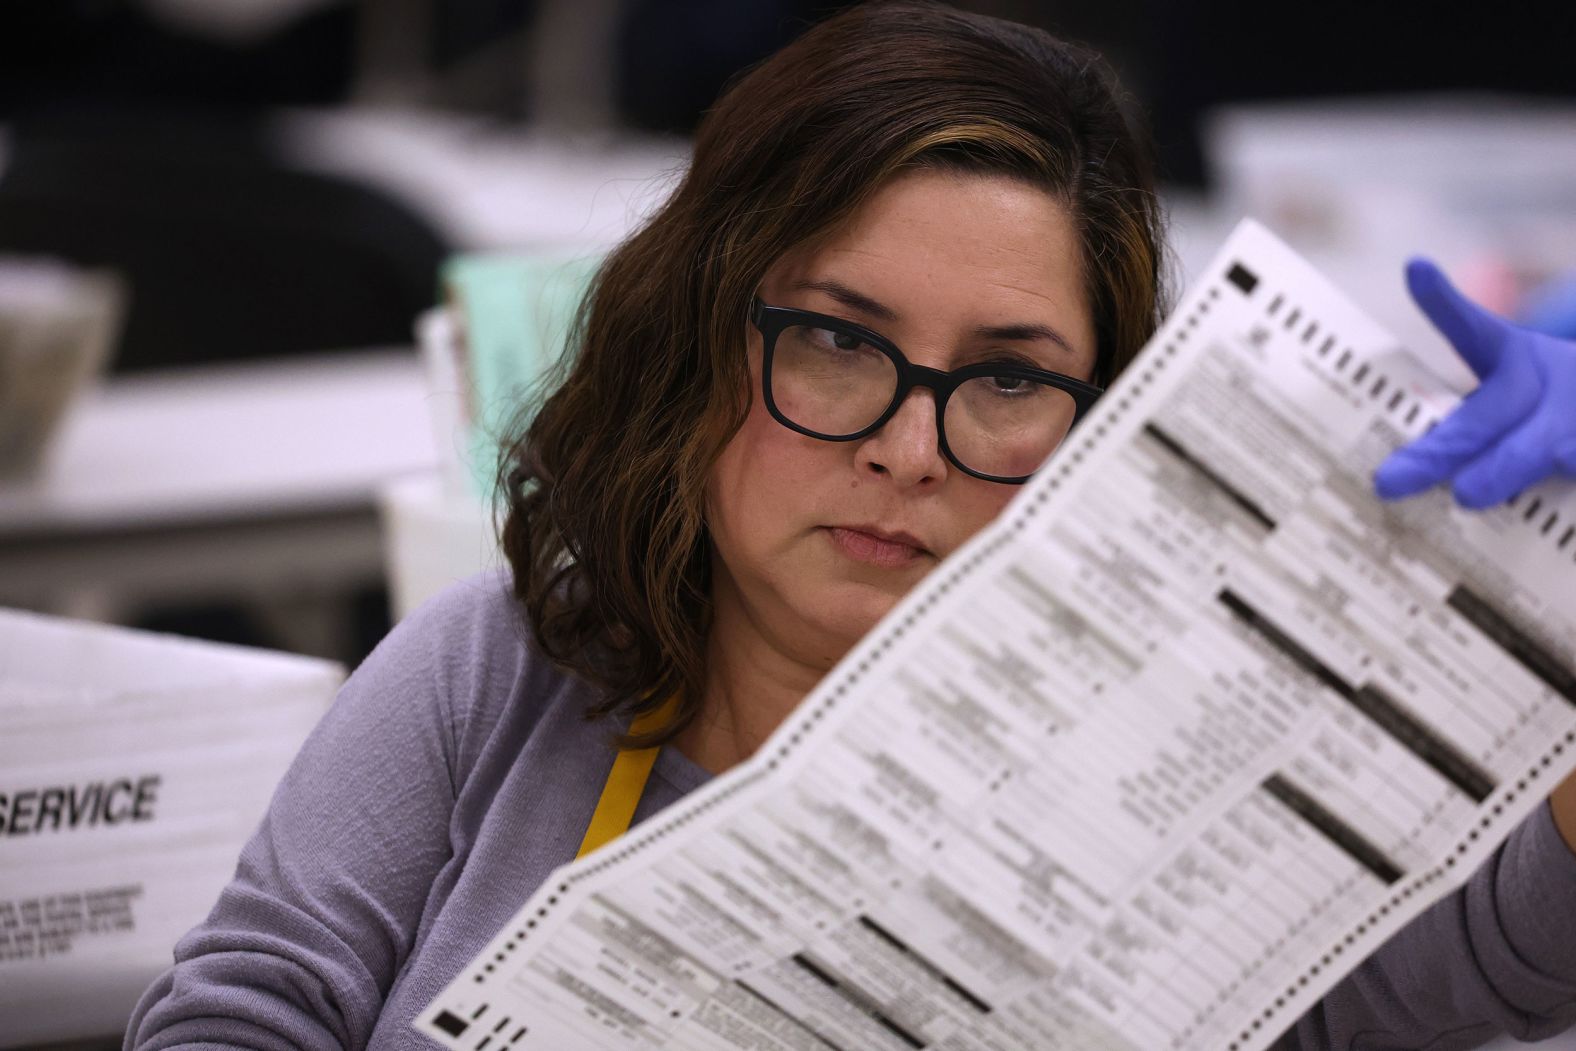 An election worker inspects a mail-in ballot in Phoenix on November 6.